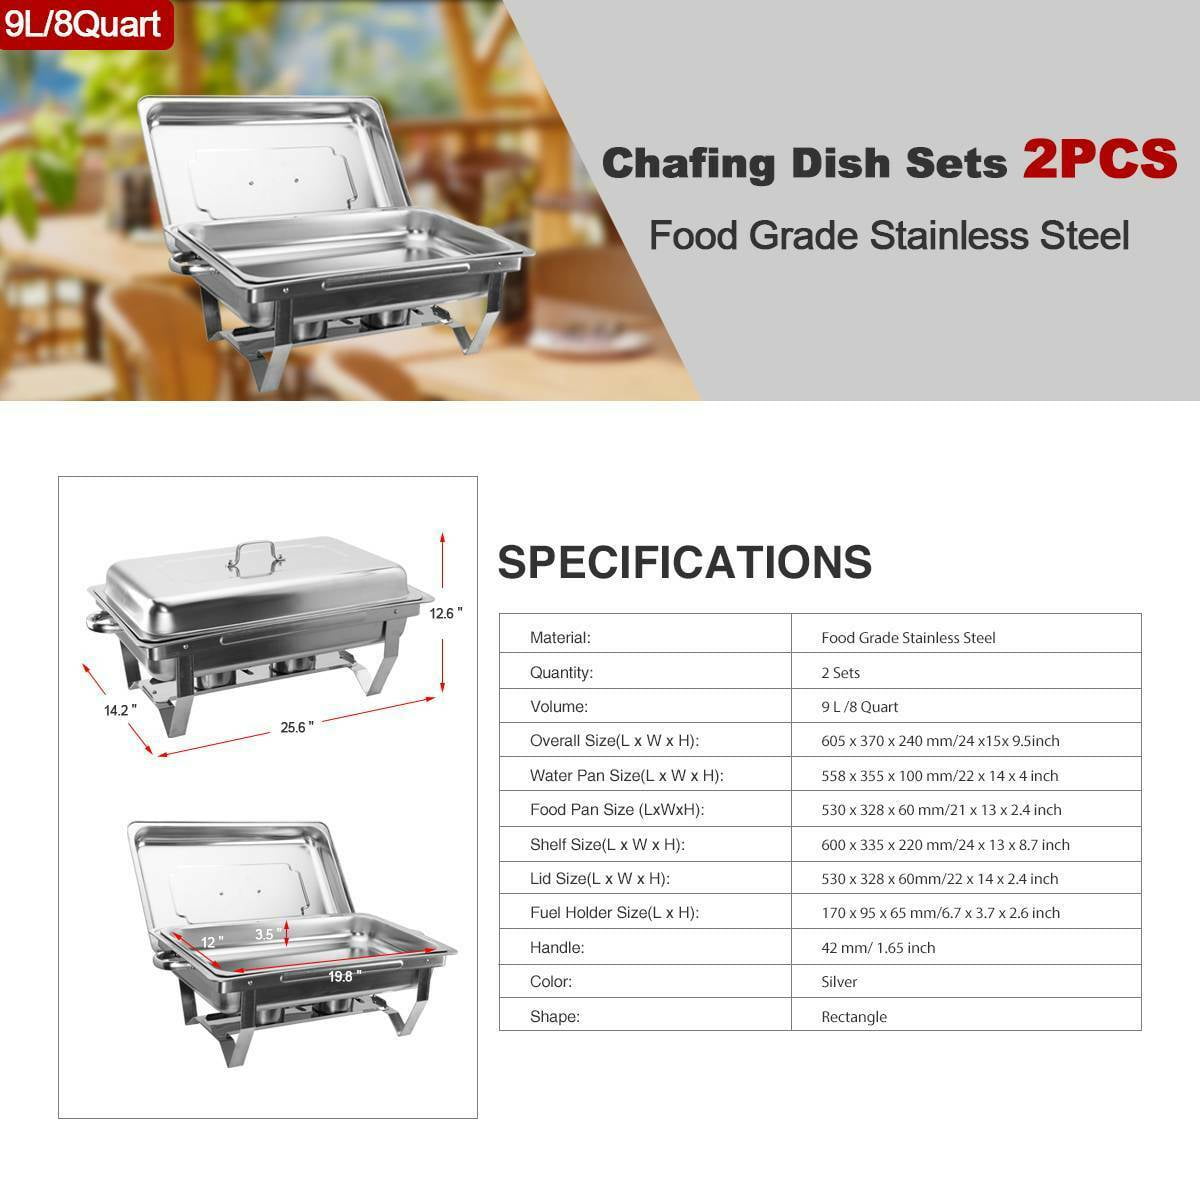 2Pack Chafer Chafing Dish Sets 9L 8Q Stainless Steel w/ Foldable Legs Trays